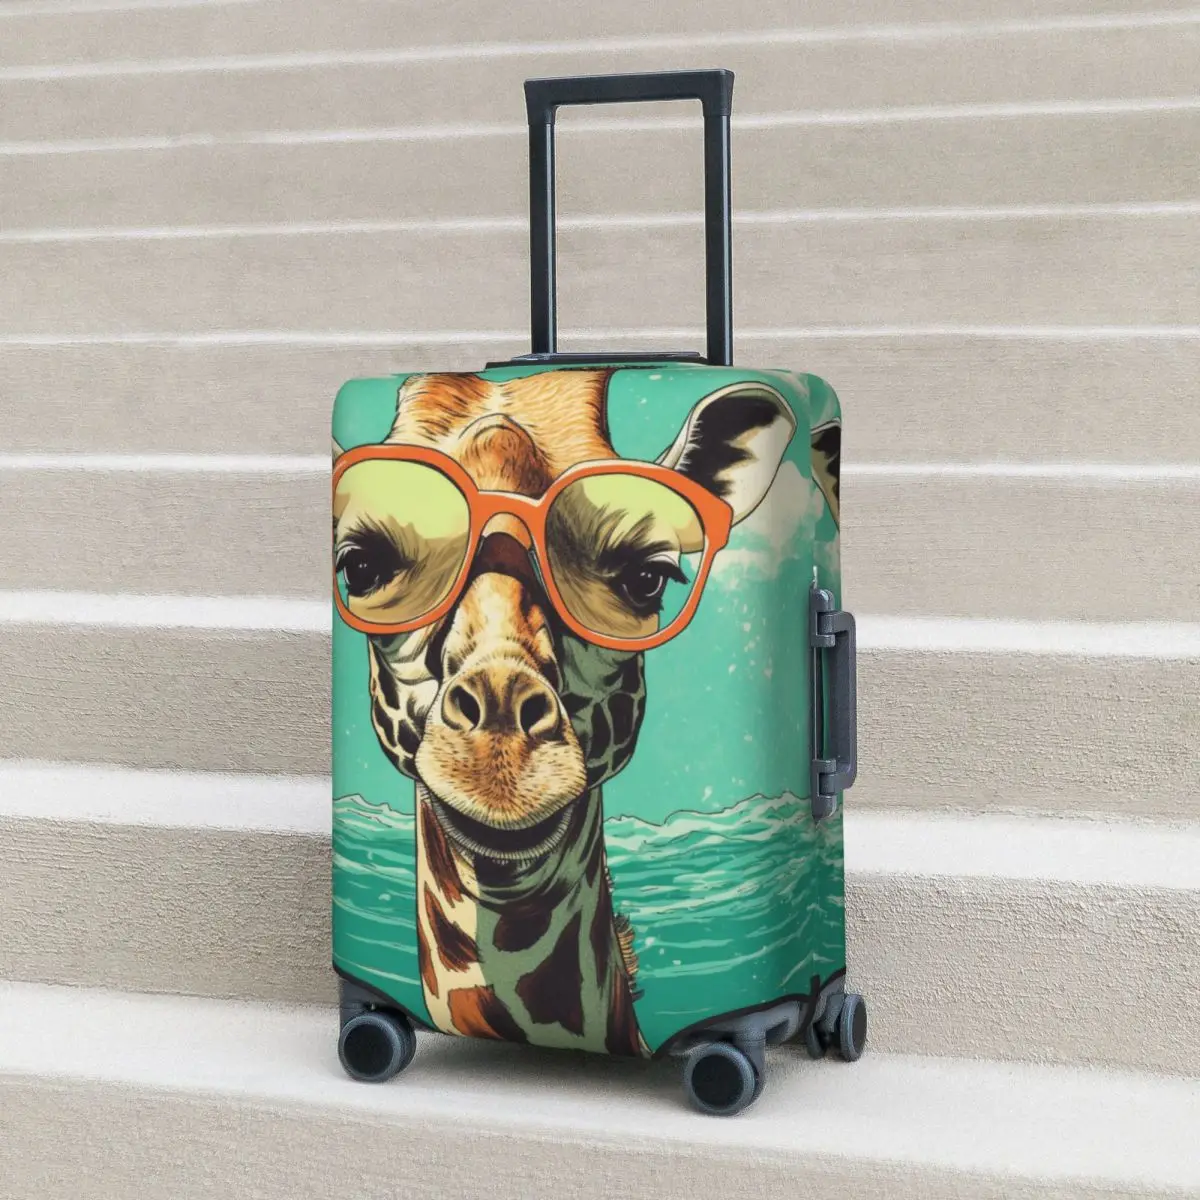 

Giraffe Suitcase Cover Sunglasses Graphic Illustration Cruise Trip Flight Useful Luggage Case Protection